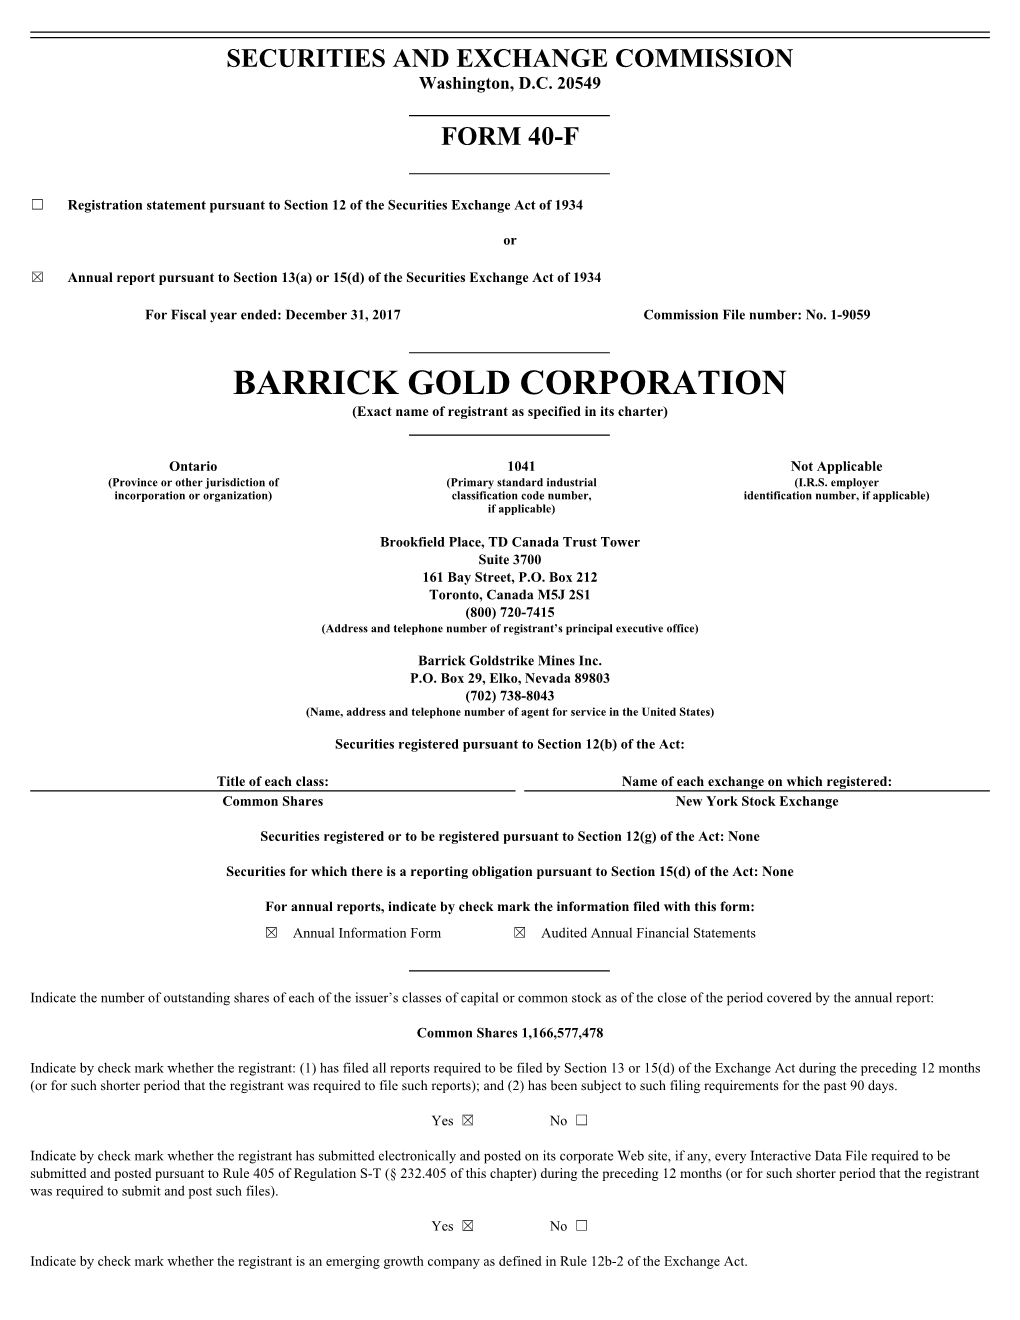 BARRICK GOLD CORPORATION (Exact Name of Registrant As Specified in Its Charter)